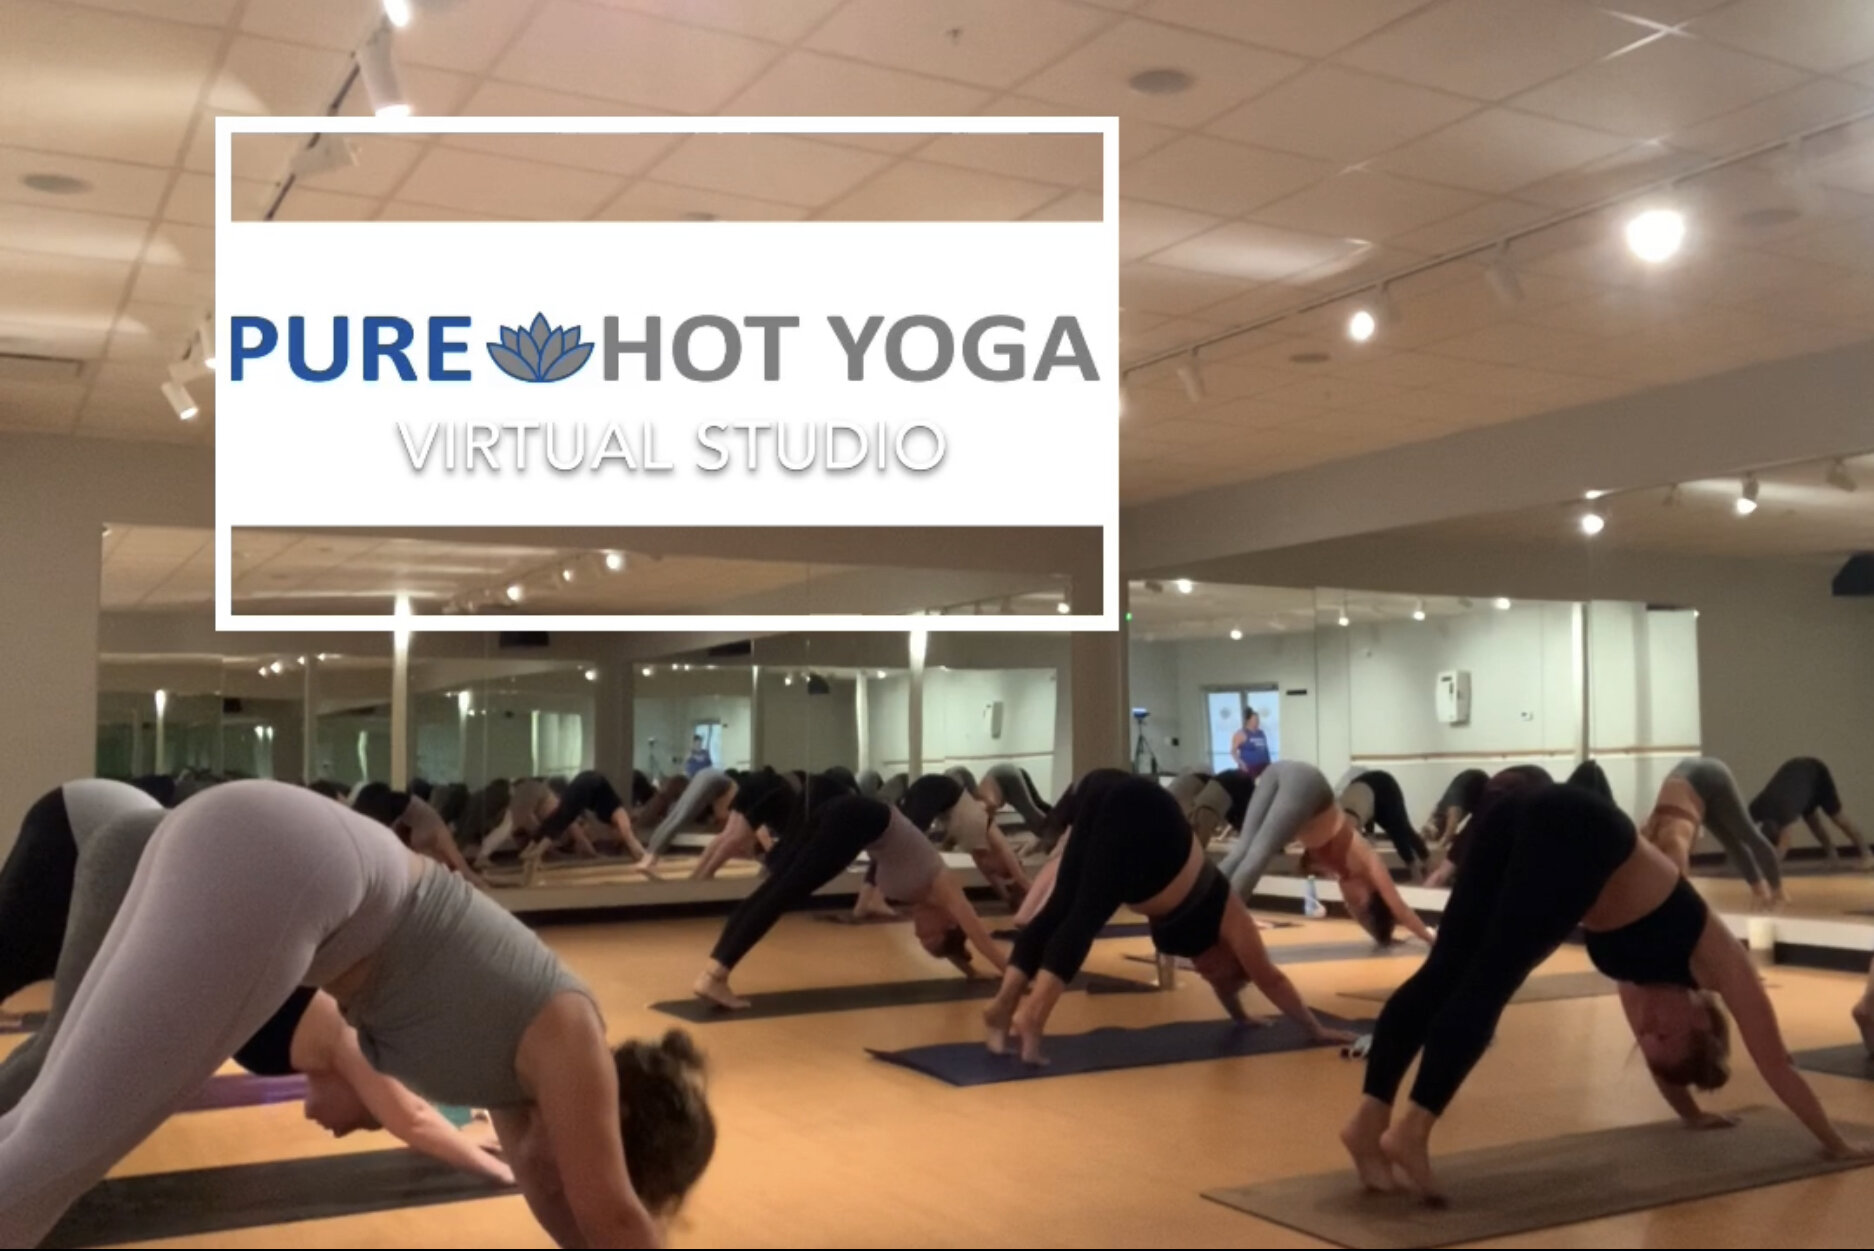 What Is Bikram Hot Yoga? + History & Poses Of This Heated Yoga Style